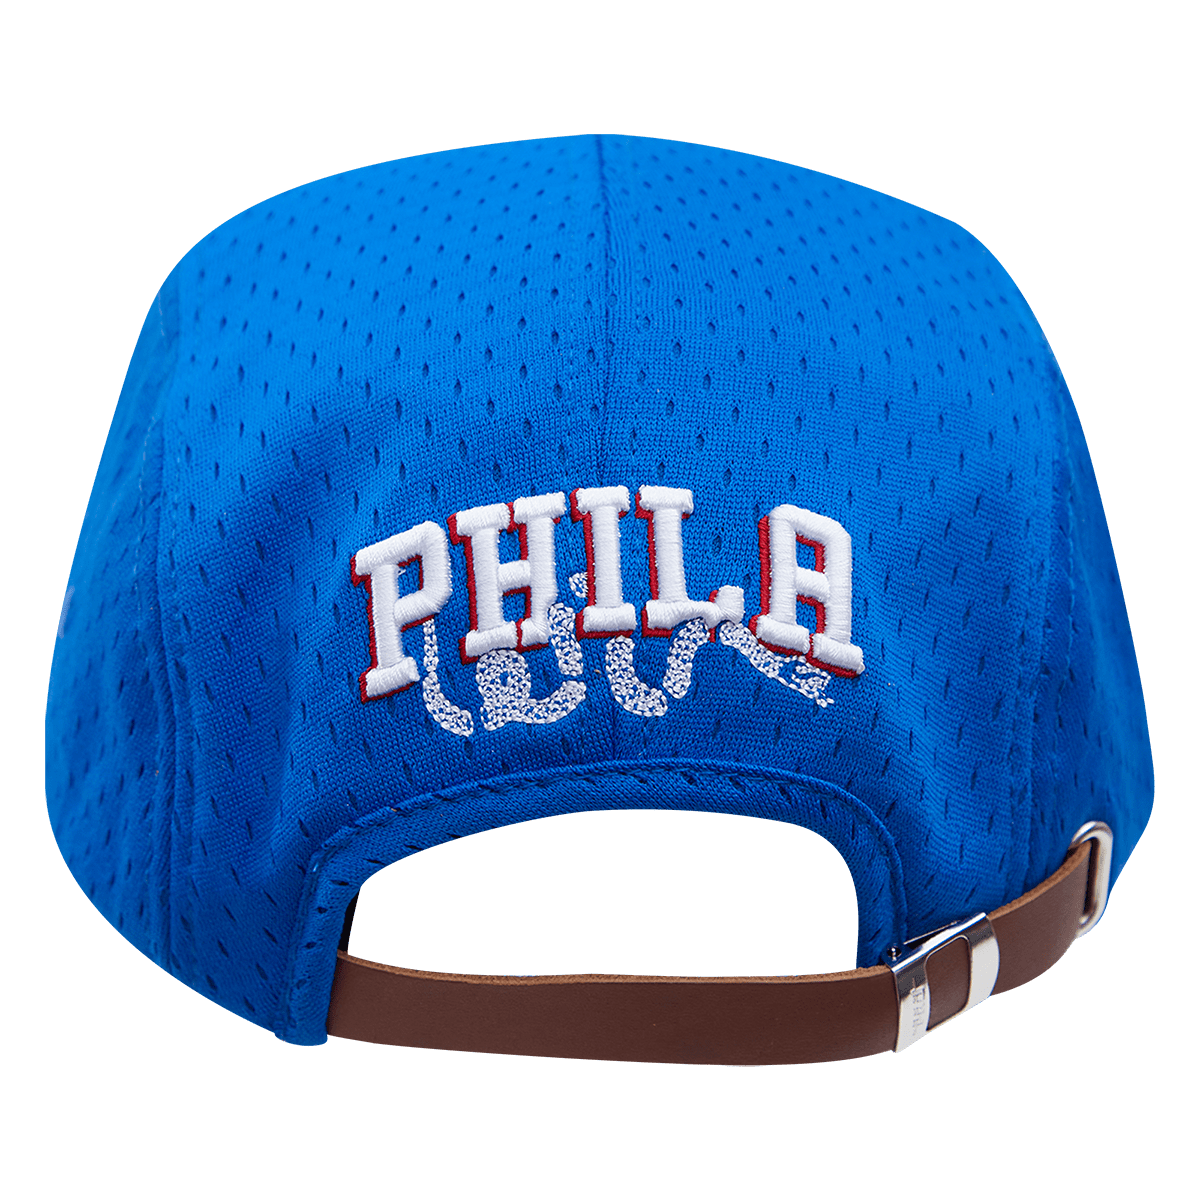 sixers hat png